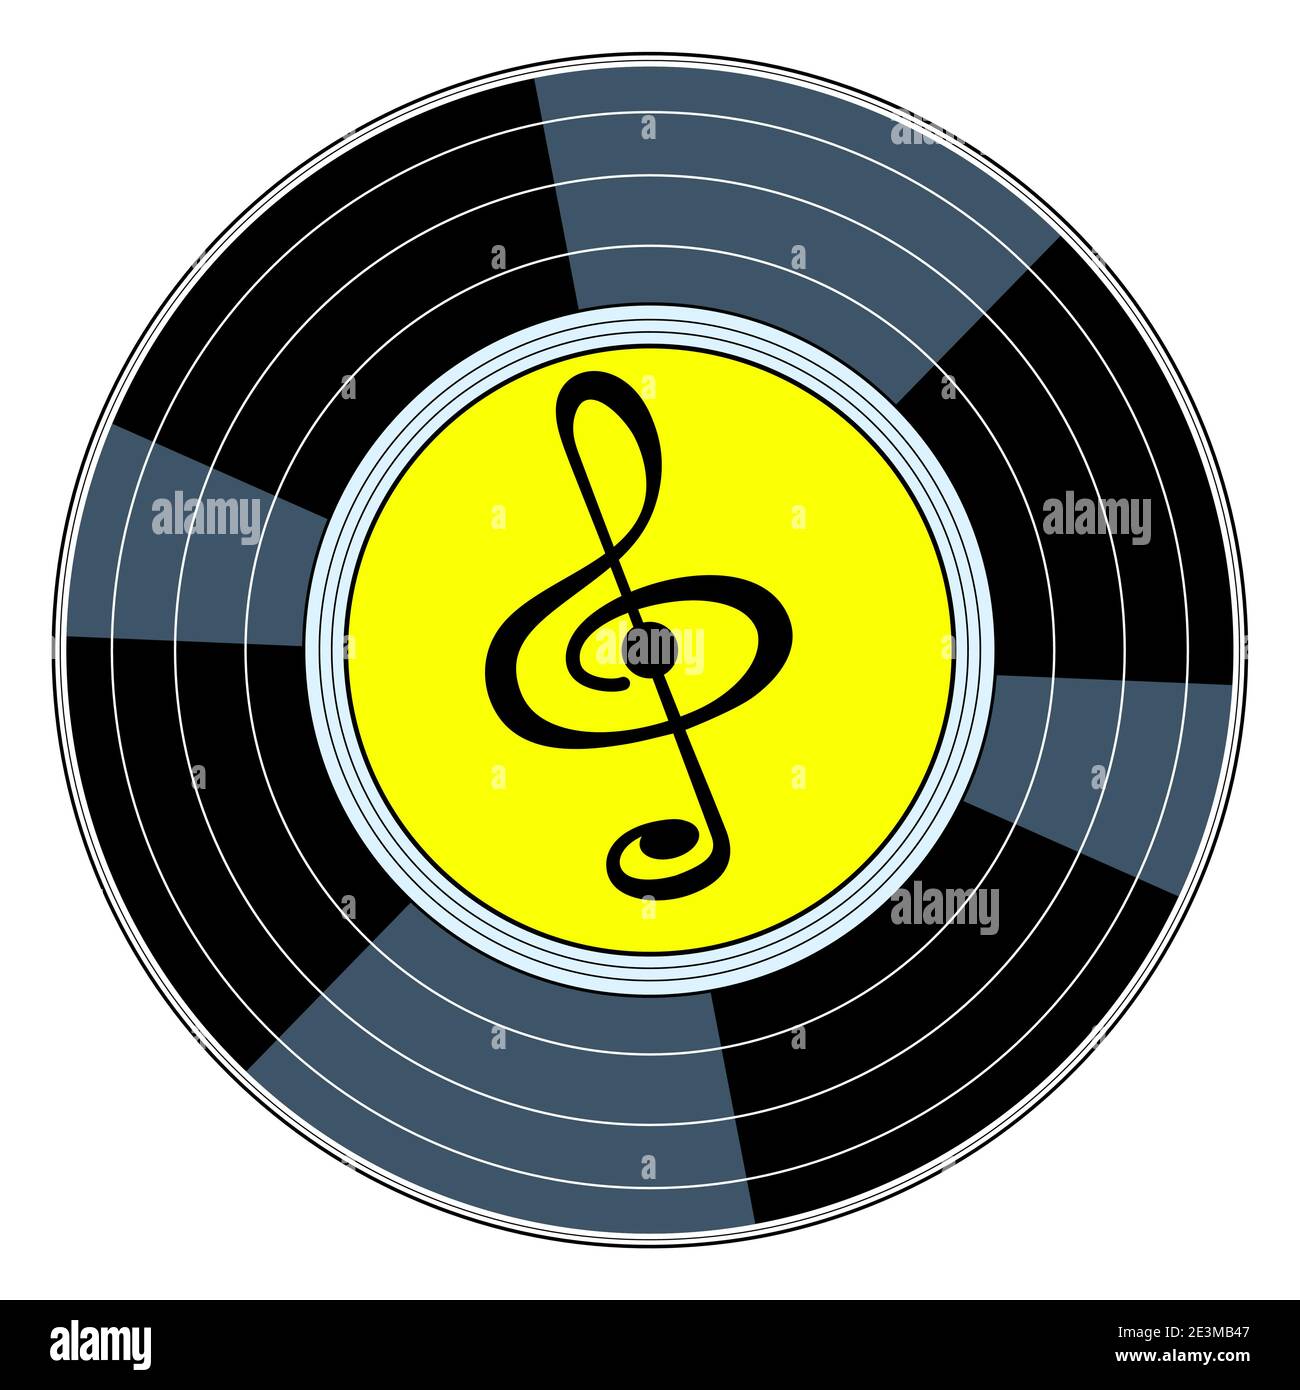 Illustration of the vintage vinyl gramophone record disk icon Stock Vector